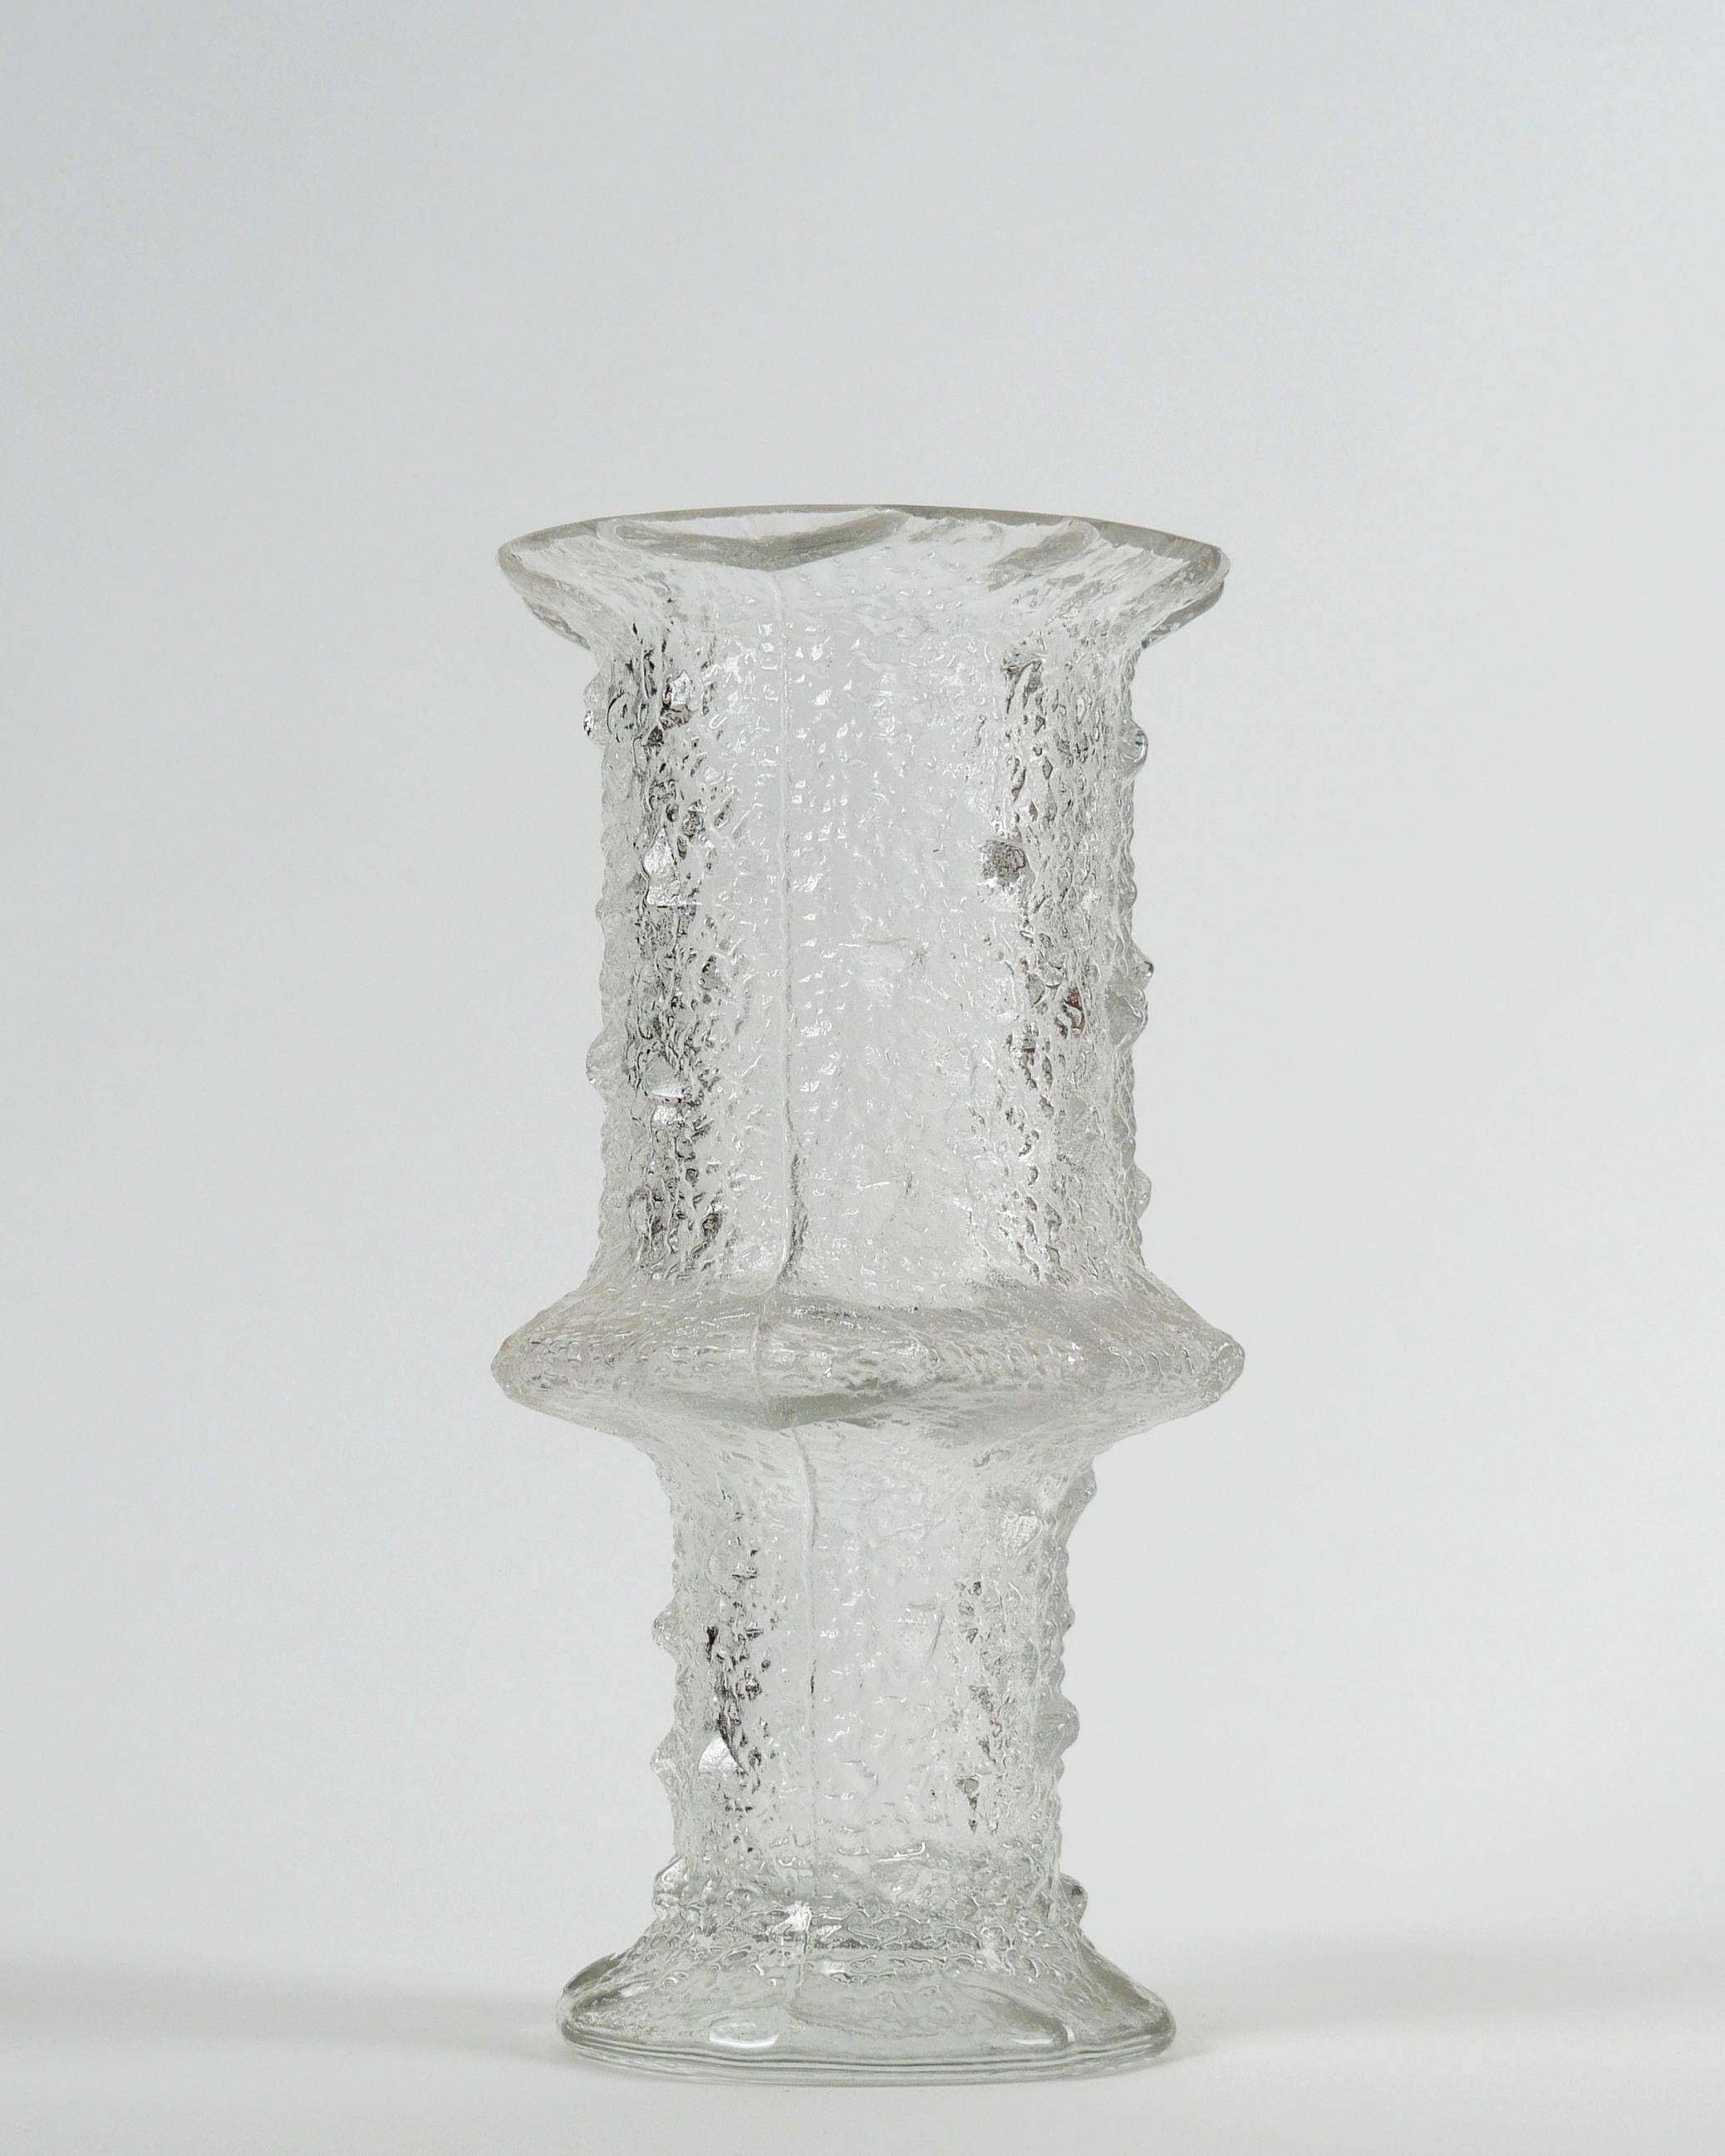 Timo Sarpaneva for Iittala, 1968
Large ‘Nardus’ Vase, model 2744, for Iittala

Clear textured mould-blown glass
Excellent condition

Dimensions approx.: diameter 13.5 cm; height 26 cm; weight: 1900 g
Shipping info: 35x25x25, 2.2kg.